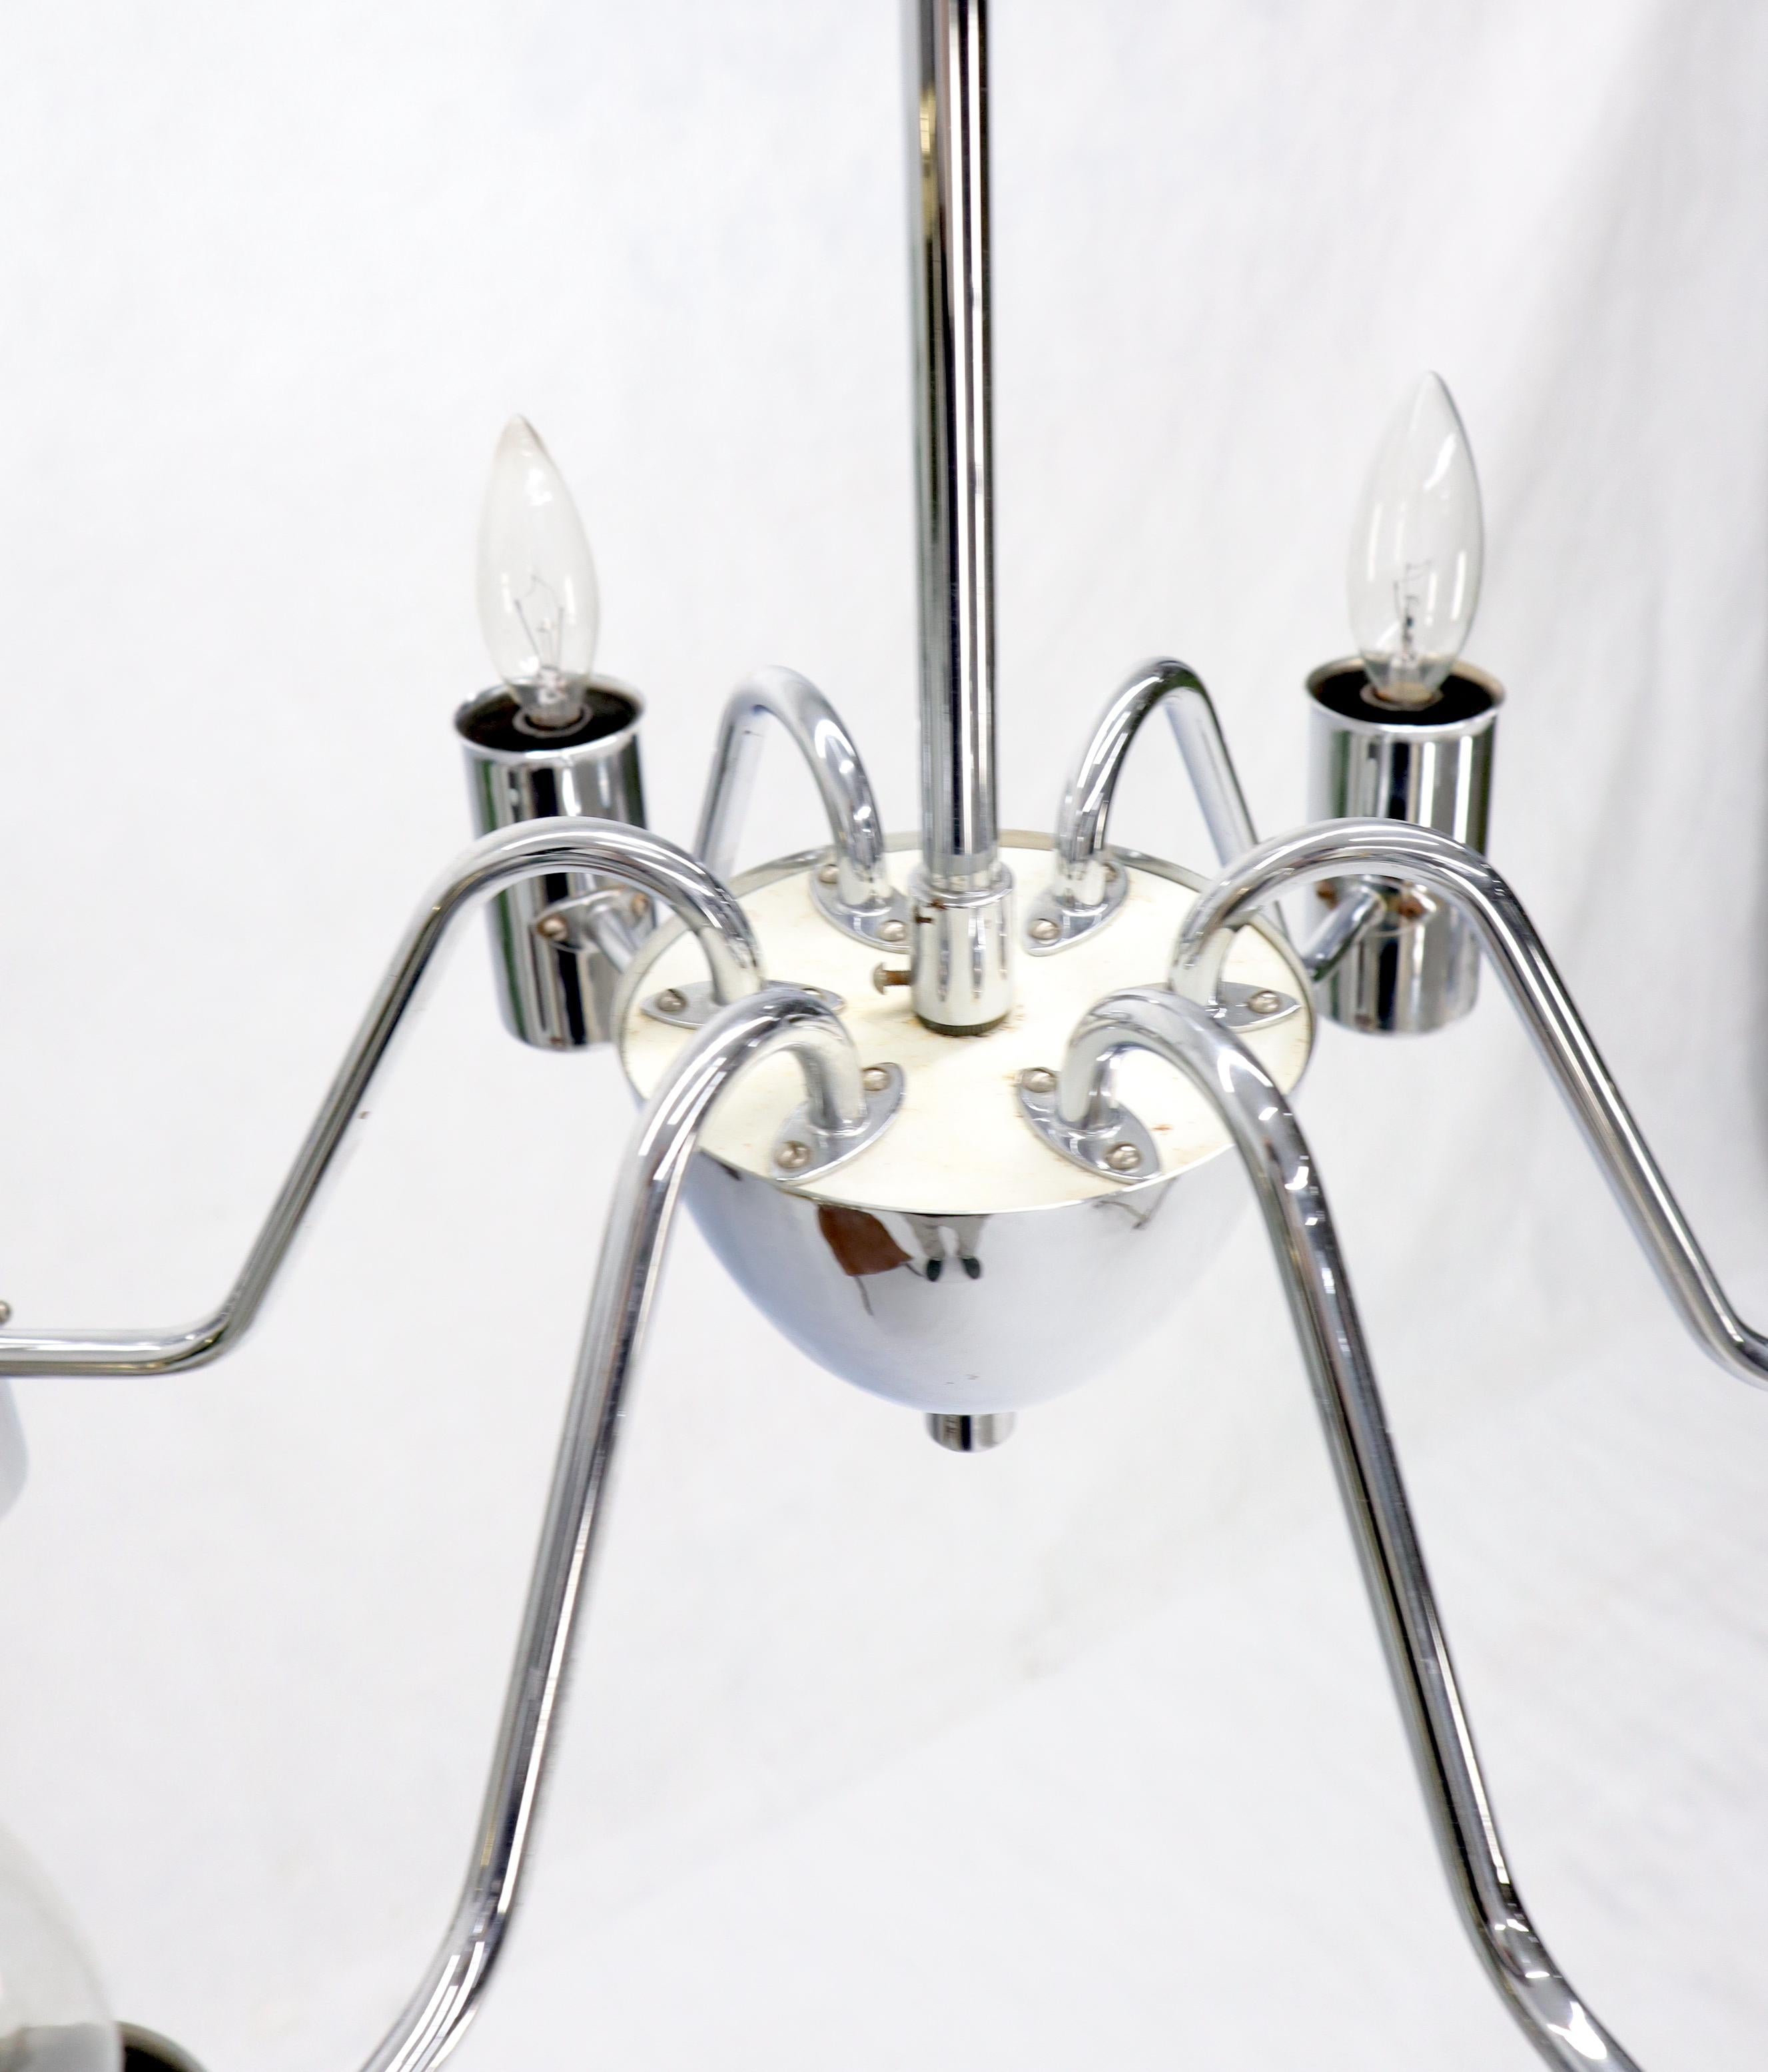 20th Century Mid-Century Modern Swedish Chrome-Plated Light Fixture Chandelier For Sale